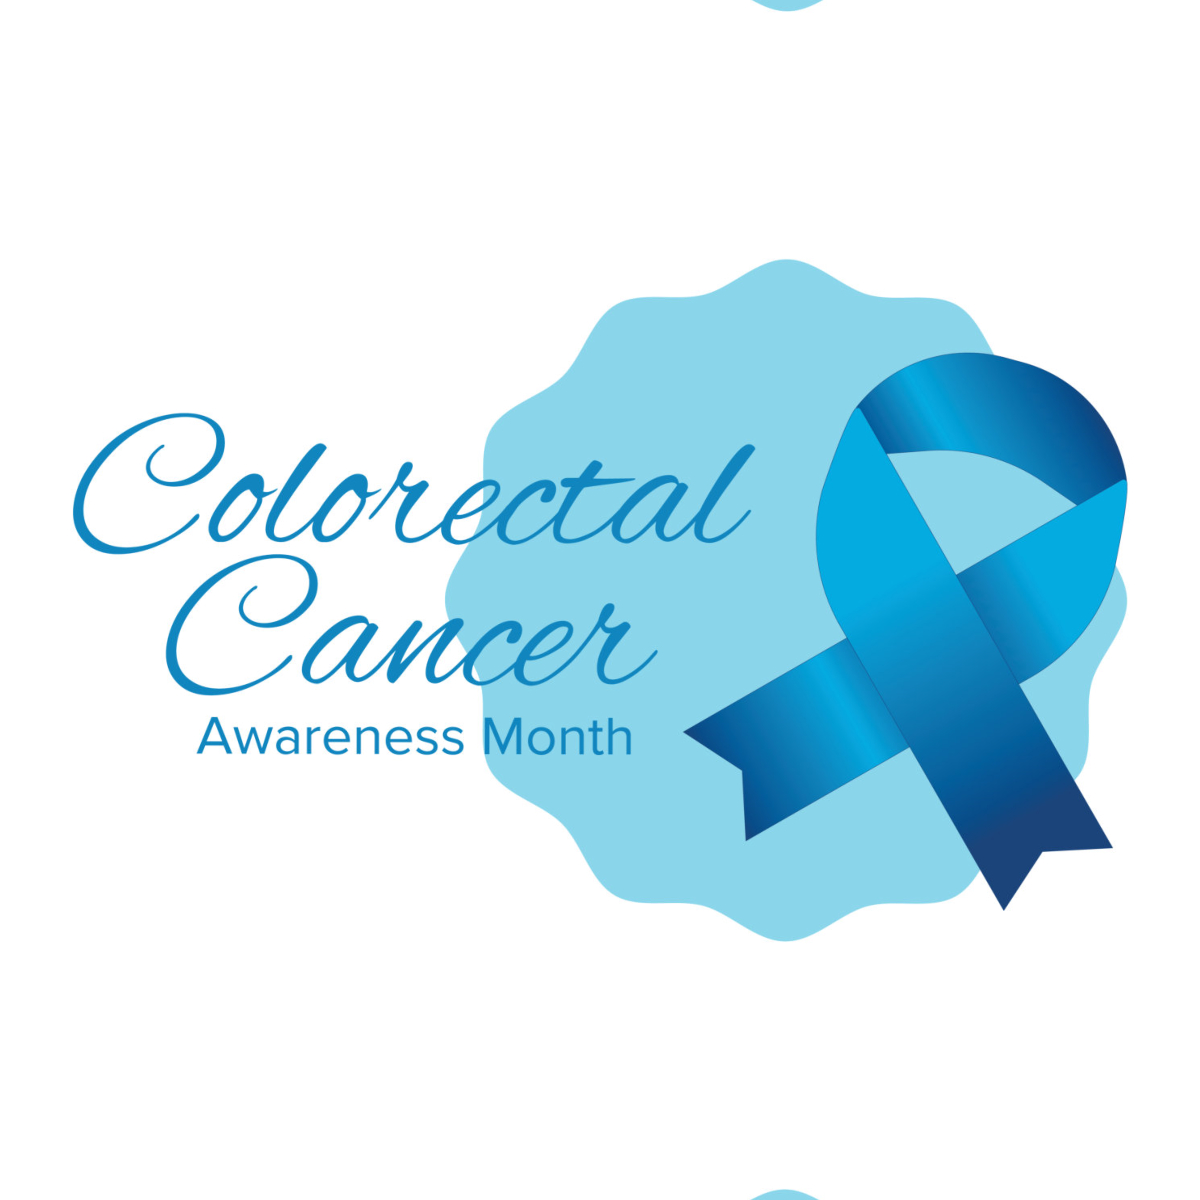 The colon, rectum, and anus play a crucial role in filtering and removing bodily waste. If affected by colorectal cancer, it can lead to difficulties with proper excretion, which makes regular screenings significant to detect any potential issues.

Be informed!

#ColorectalHealth